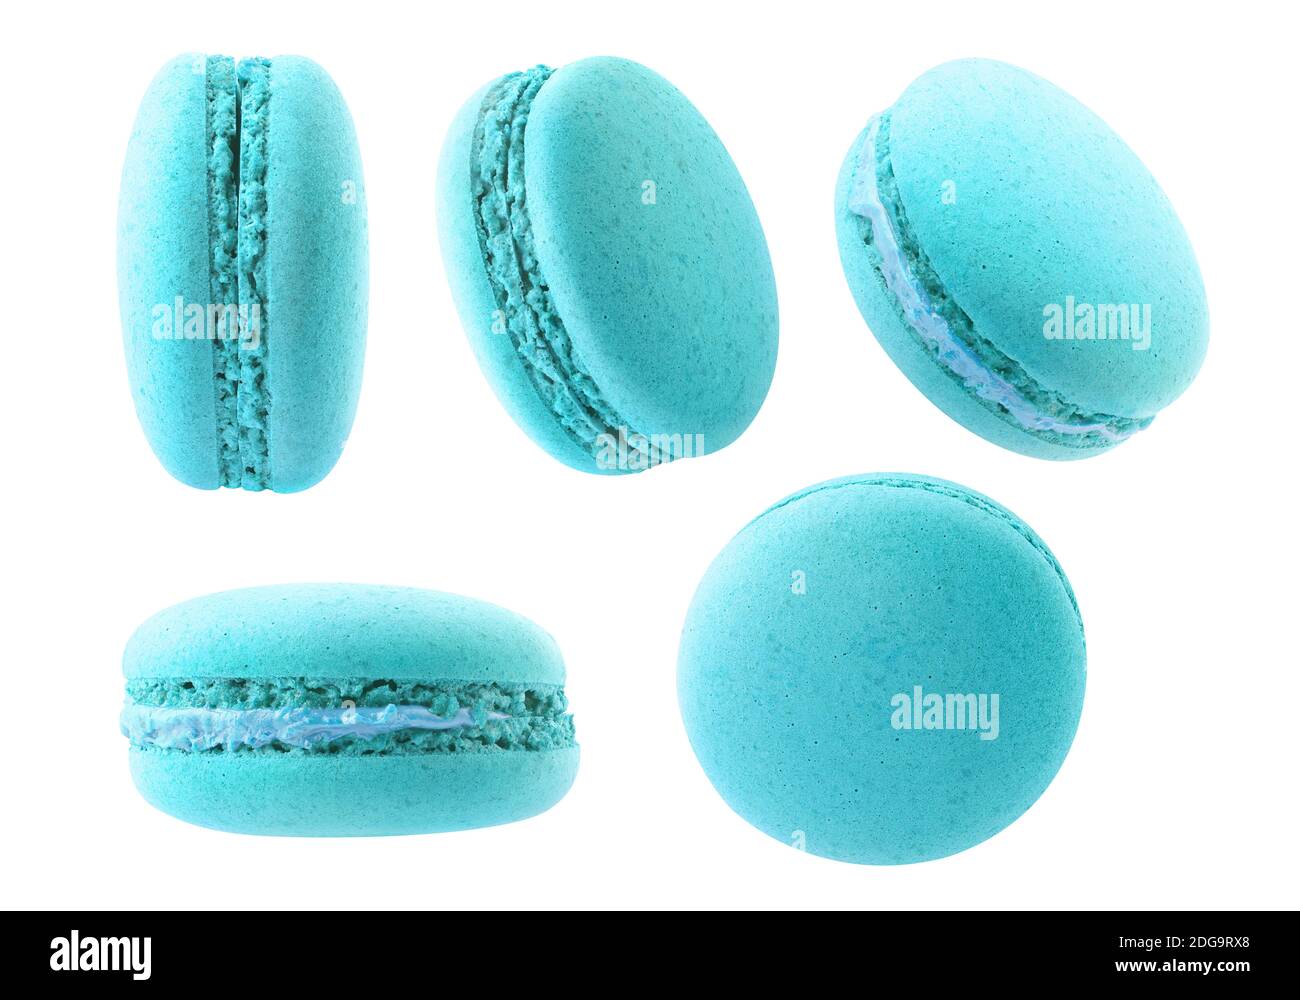 Isolated light blue macarons. Collection of blueberry or bubblegum macaroons at different angles isolated on white background Stock Photo